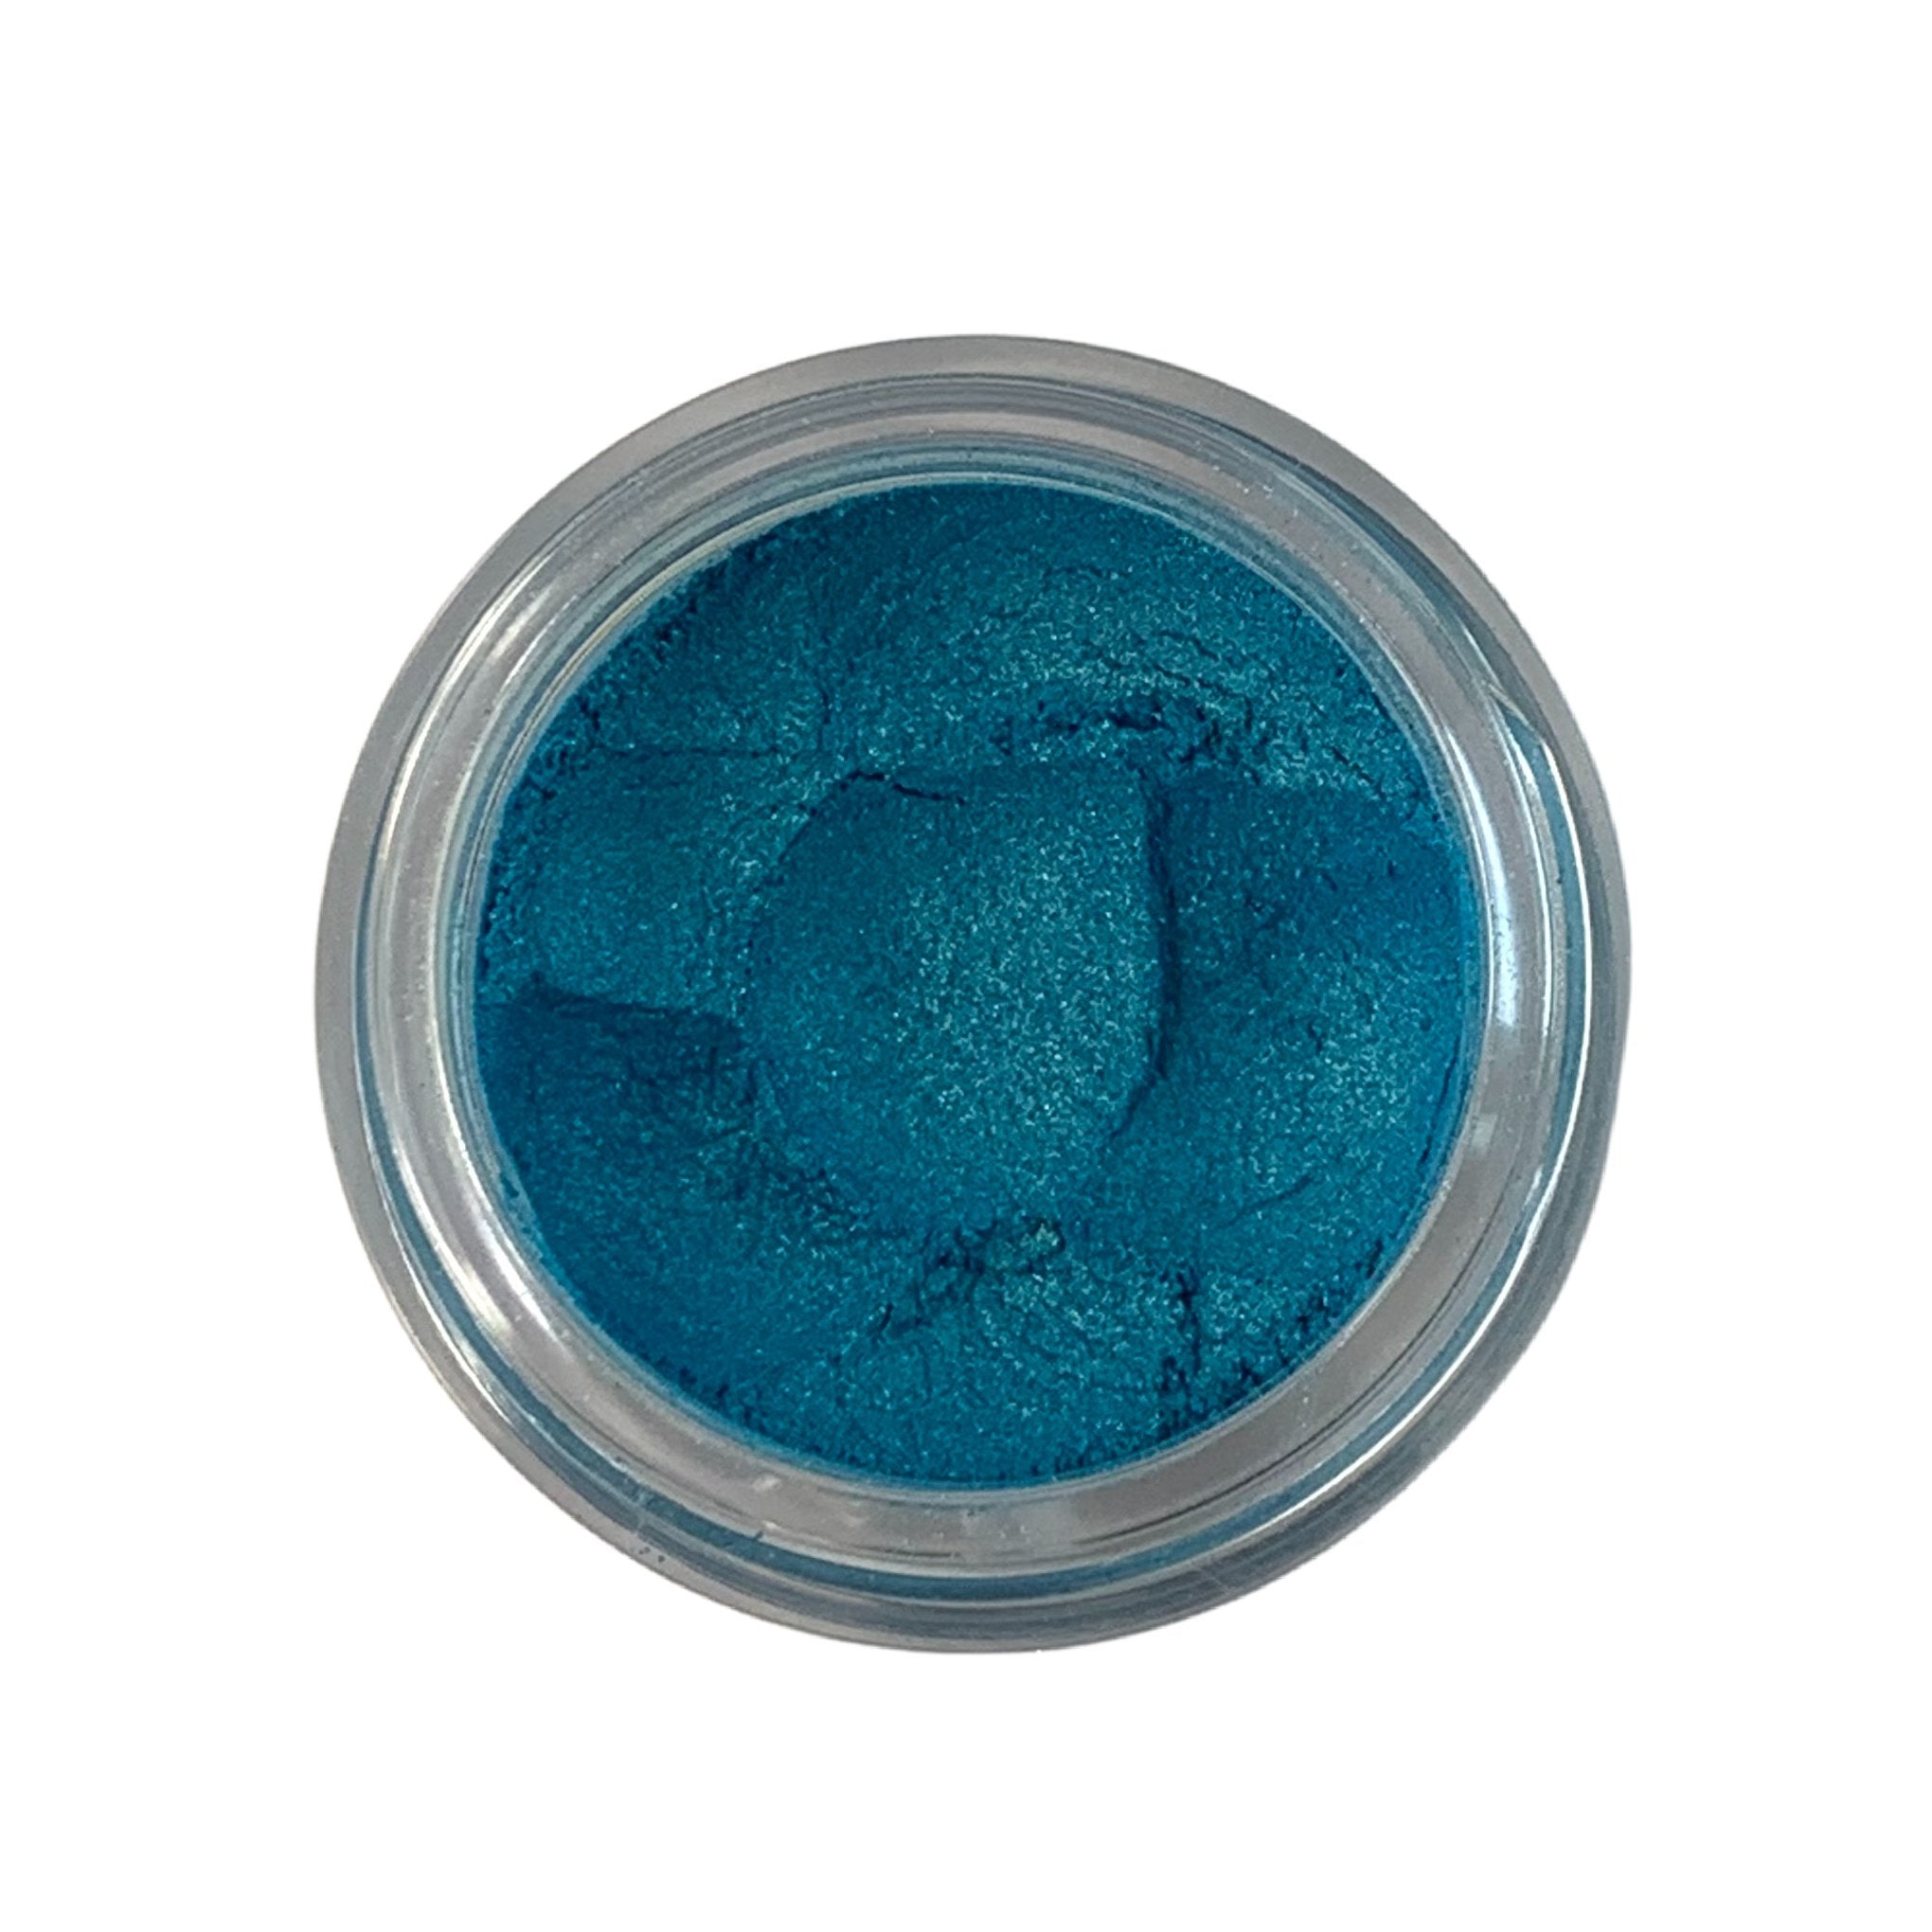 tide - blueish turquoise loose mineral eyeshadow. vegan and cruelty free. 10 gram sifter jar